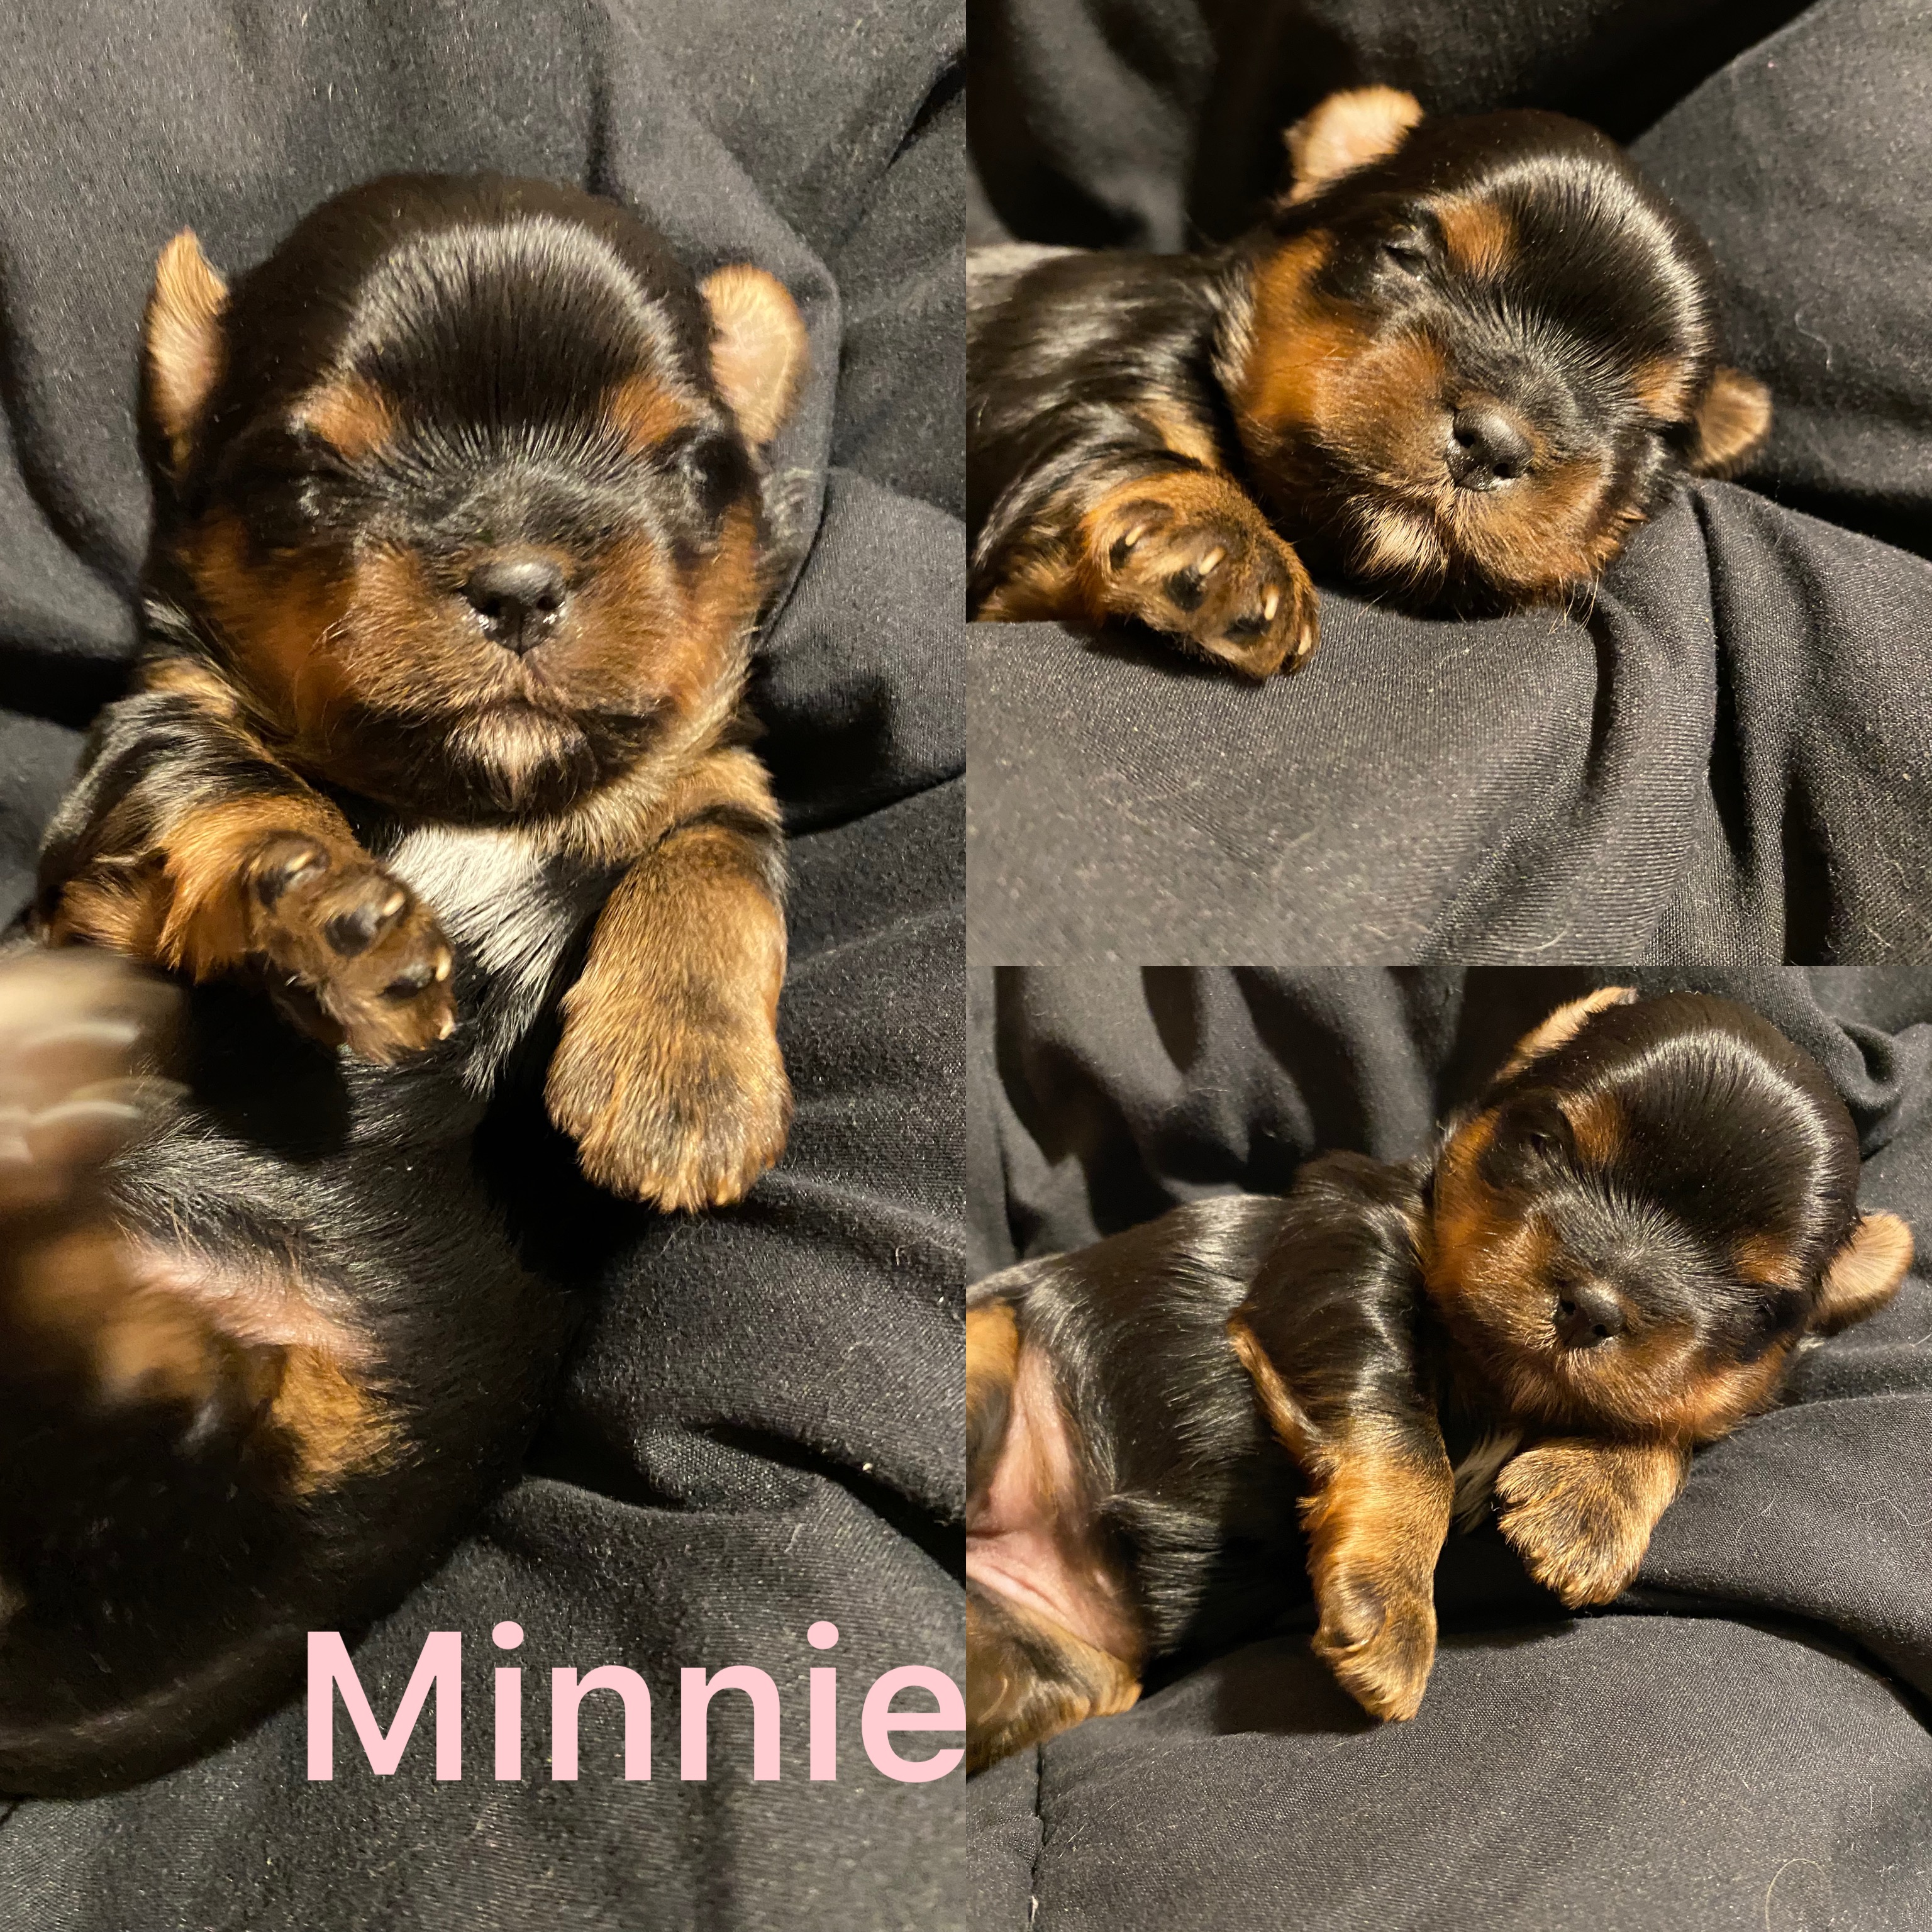 Minnie ADOPTED not available